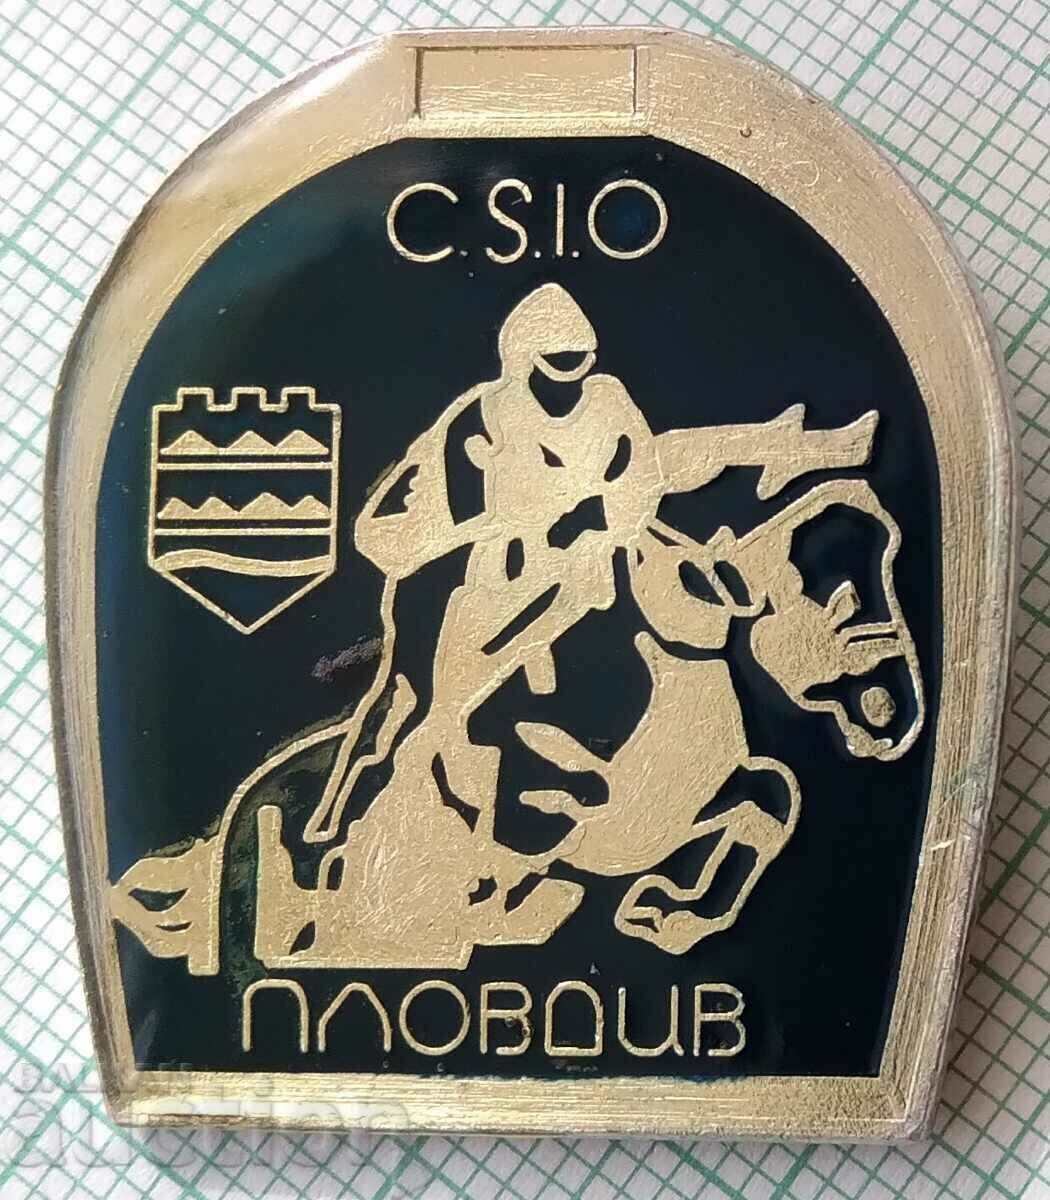 13540 Badge - Competitions Equestrian Sport Plovdiv